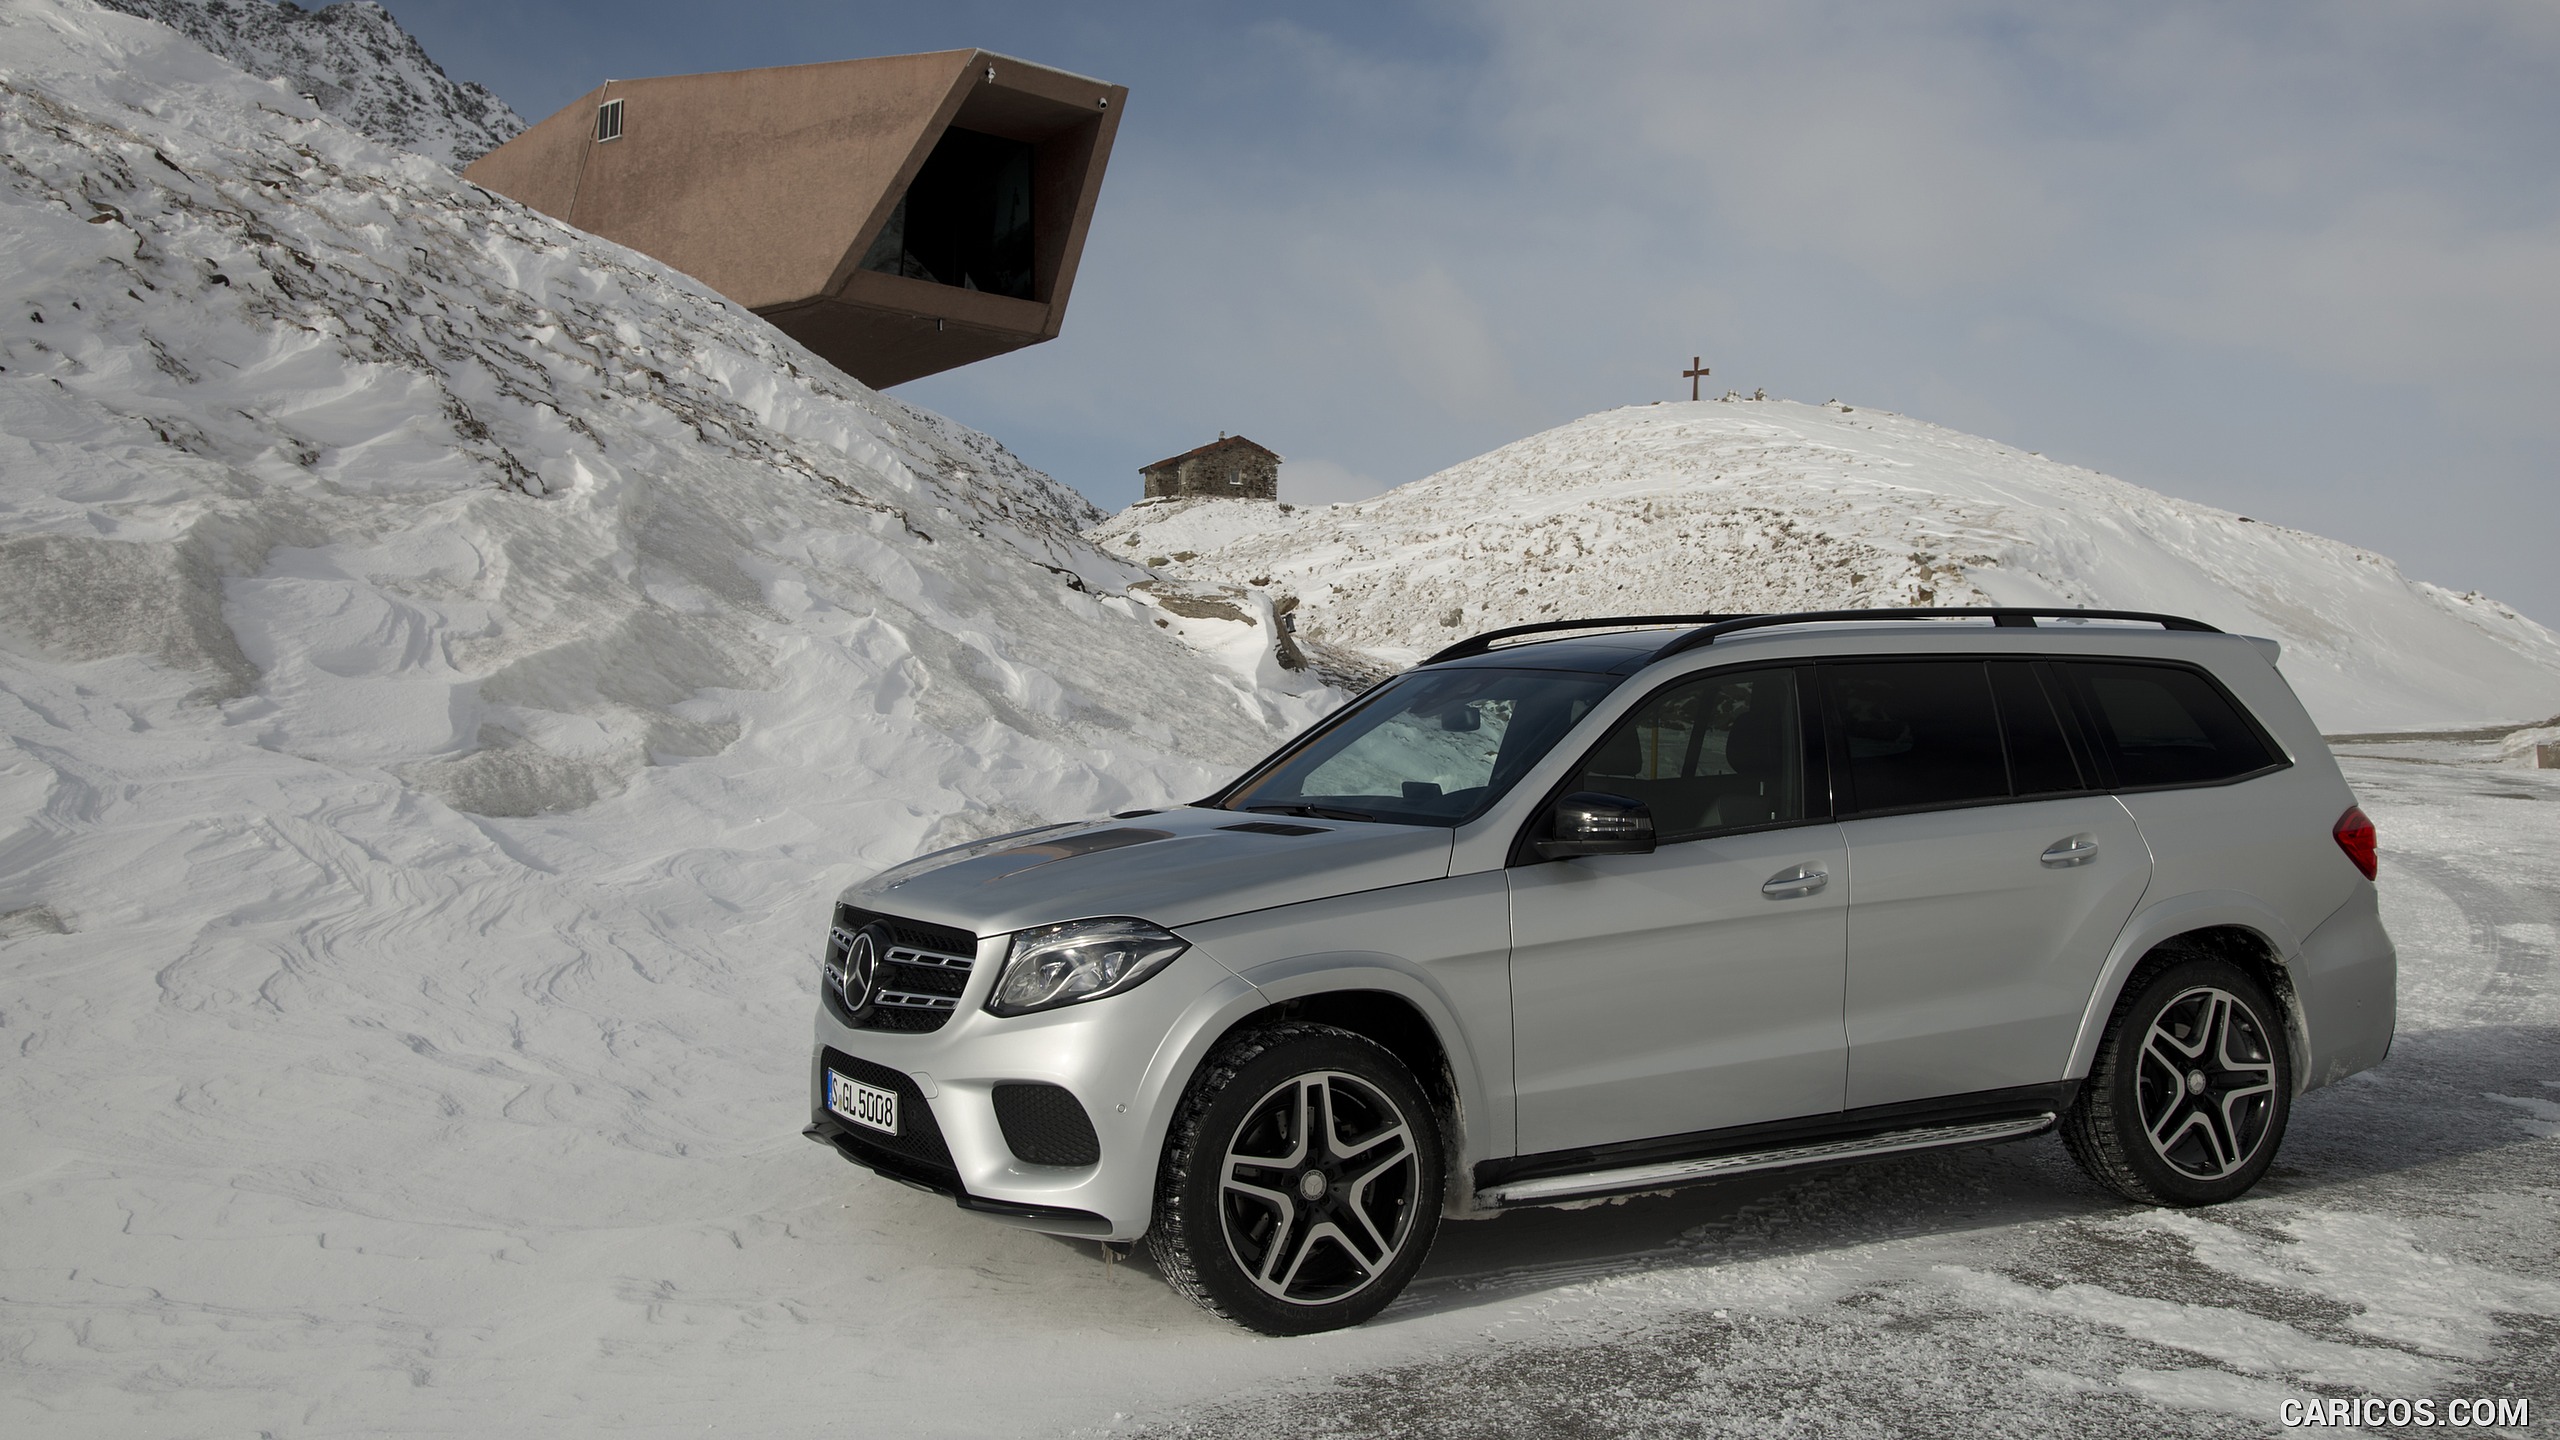 2017 Mercedes-Benz GLS 500 4MATIC AMG Line in Snow - Side, #139 of 255